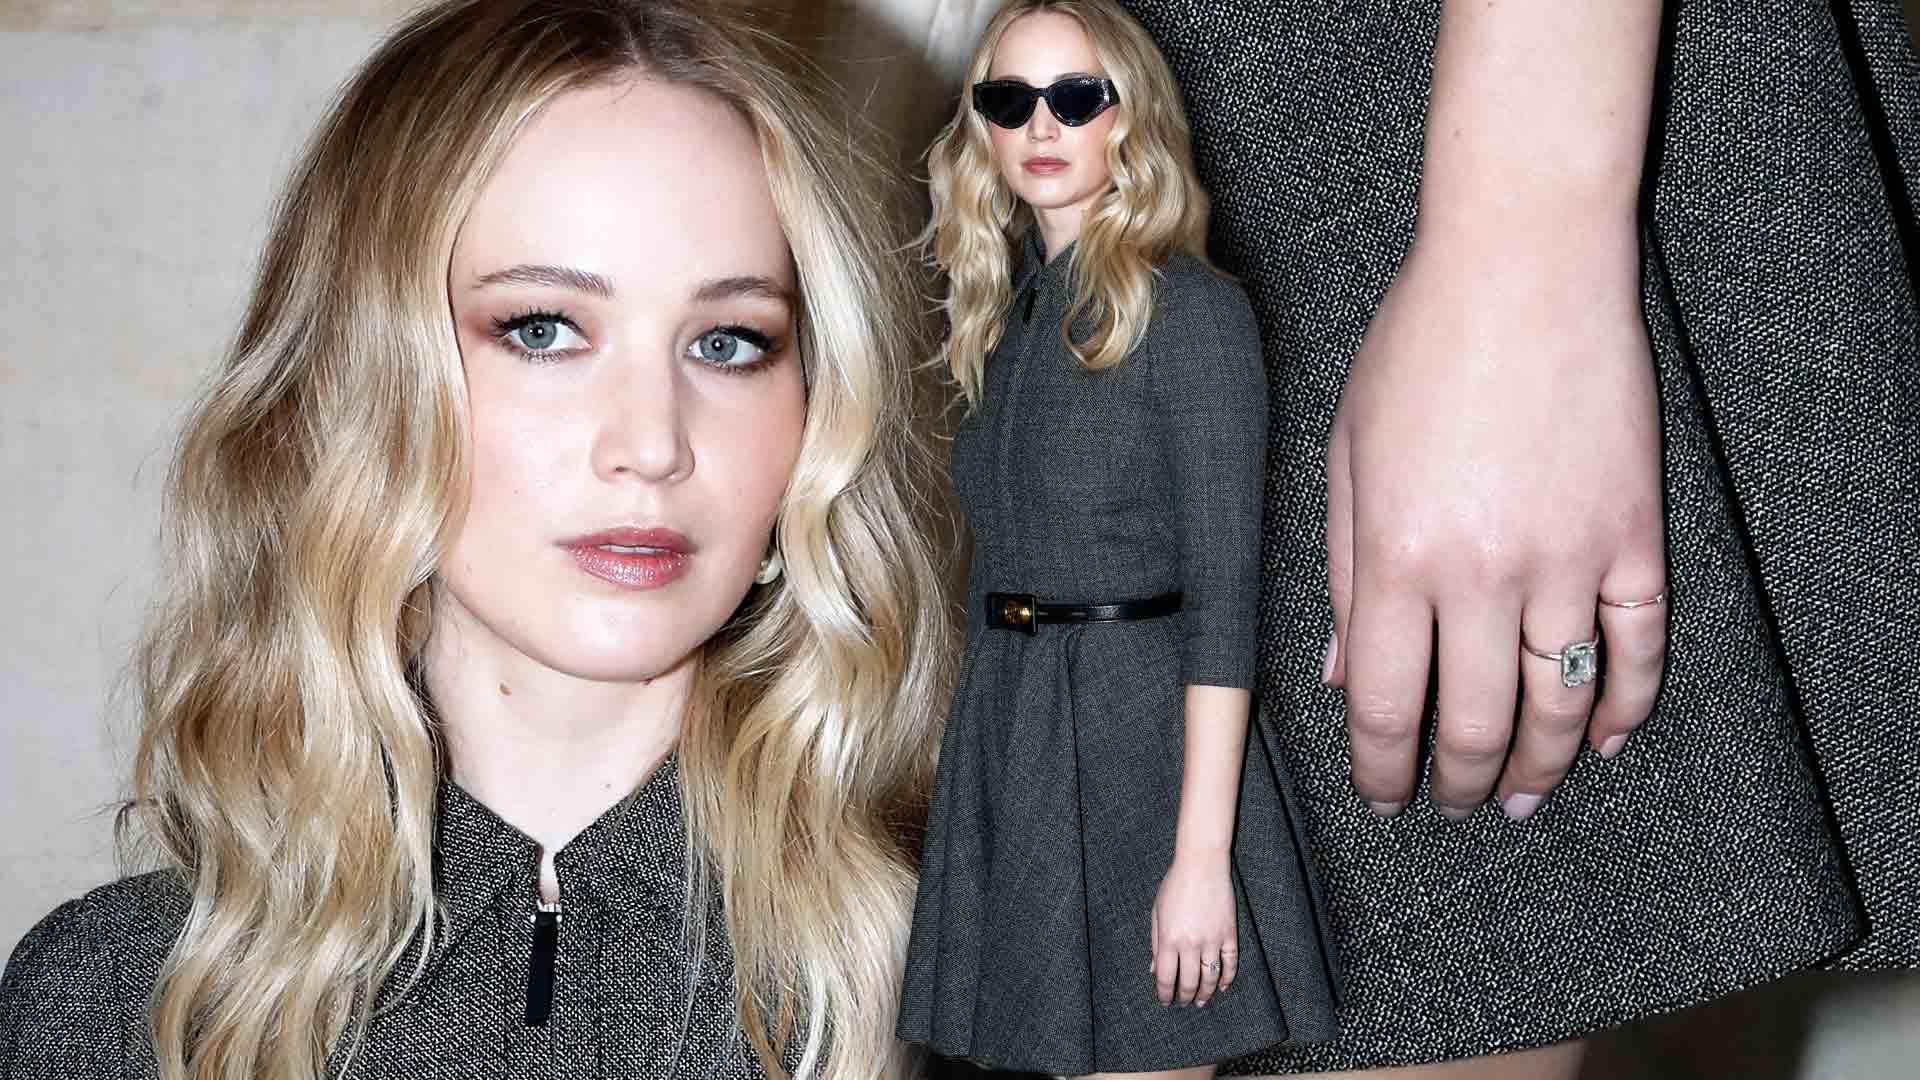 Jennifer Lawrence Flashes Engagement Ring in First Public Appearance Since Proposal